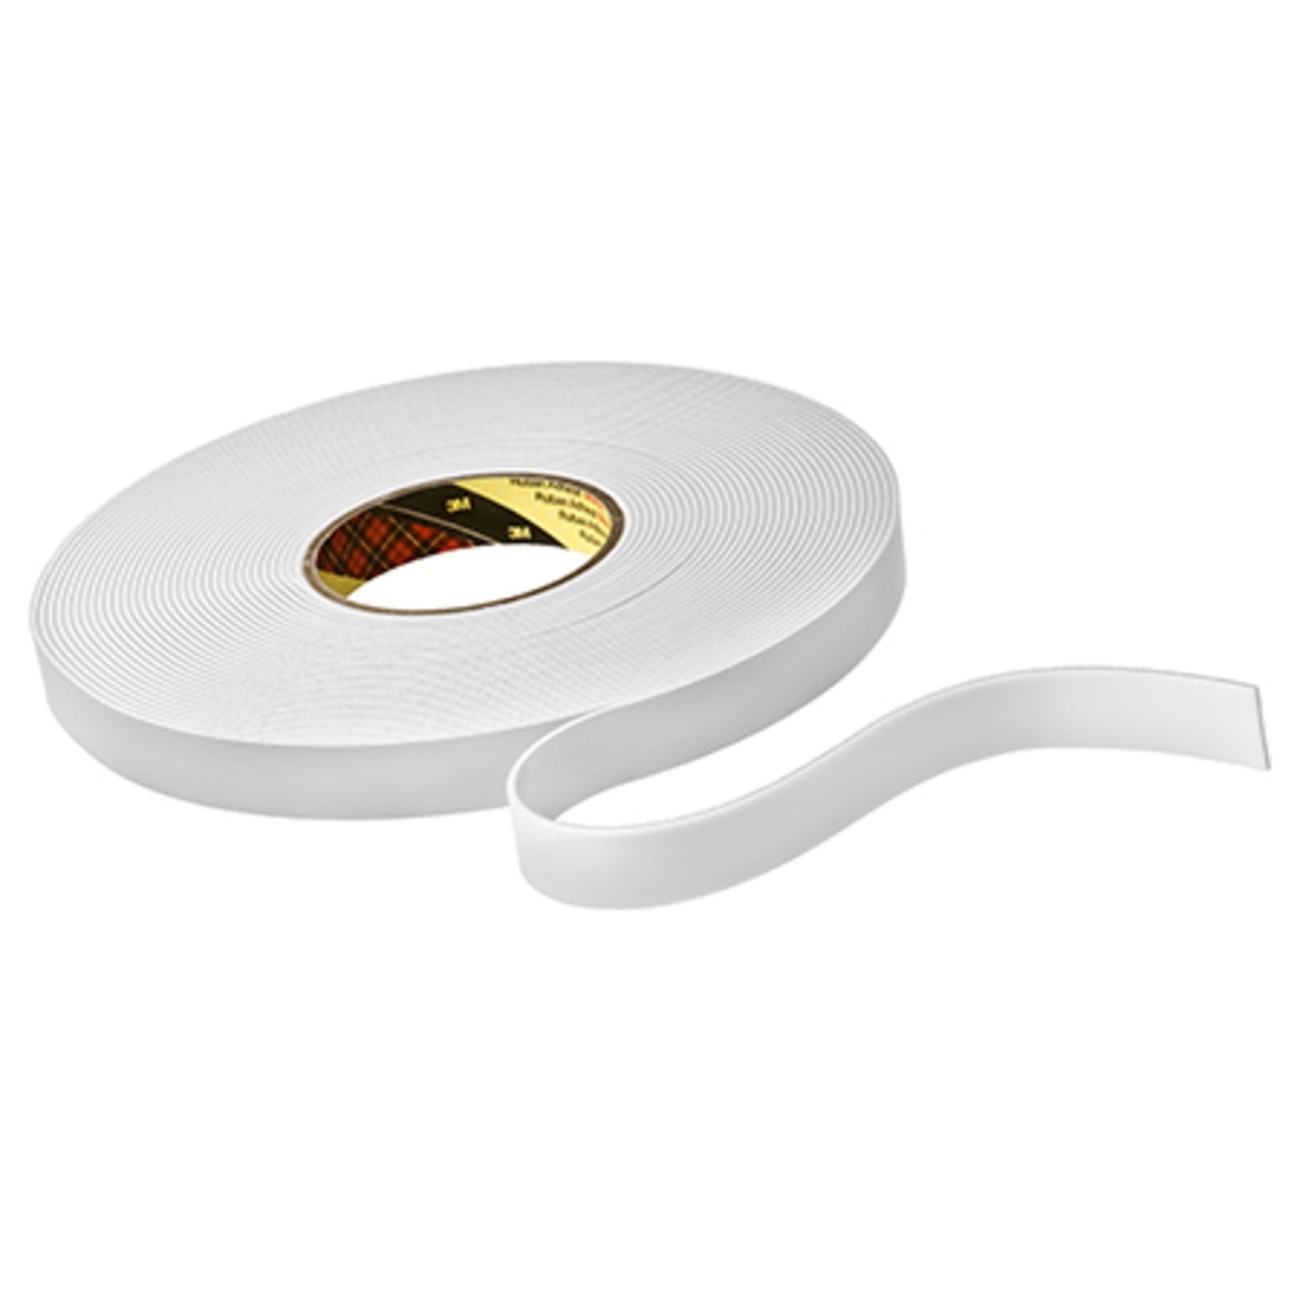 3M Double-sided PE foam tape with acrylic adhesive 9515W, white, 12 mm x 33 m, 1.5 mm